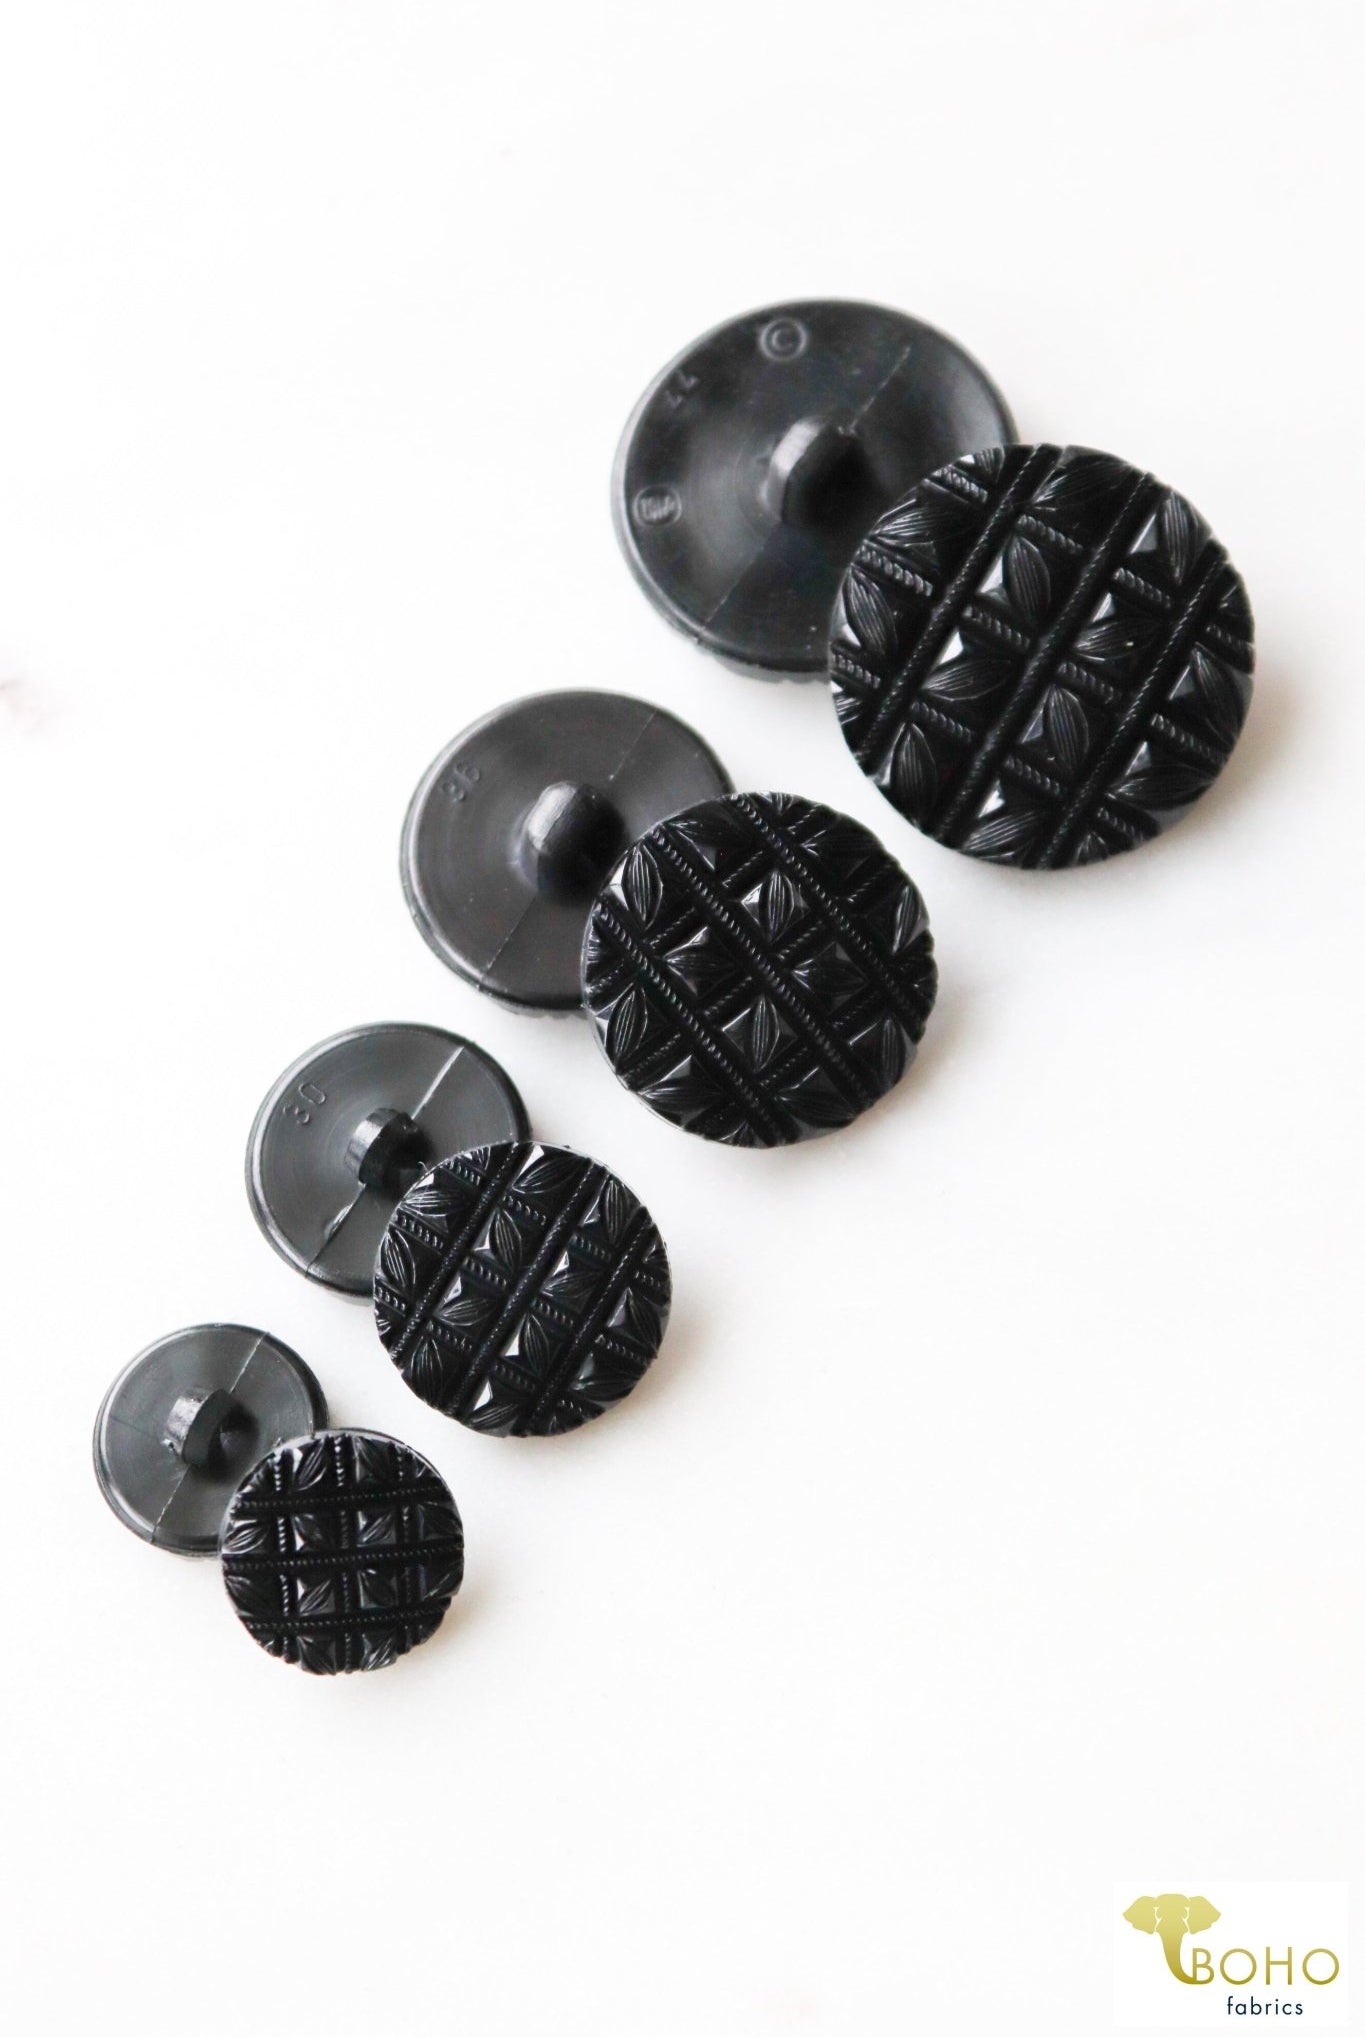 Etched Hepburn, Shank Buttons in Black. Available in 15mm, 19mm, 23mm, 28mm - Boho Fabrics